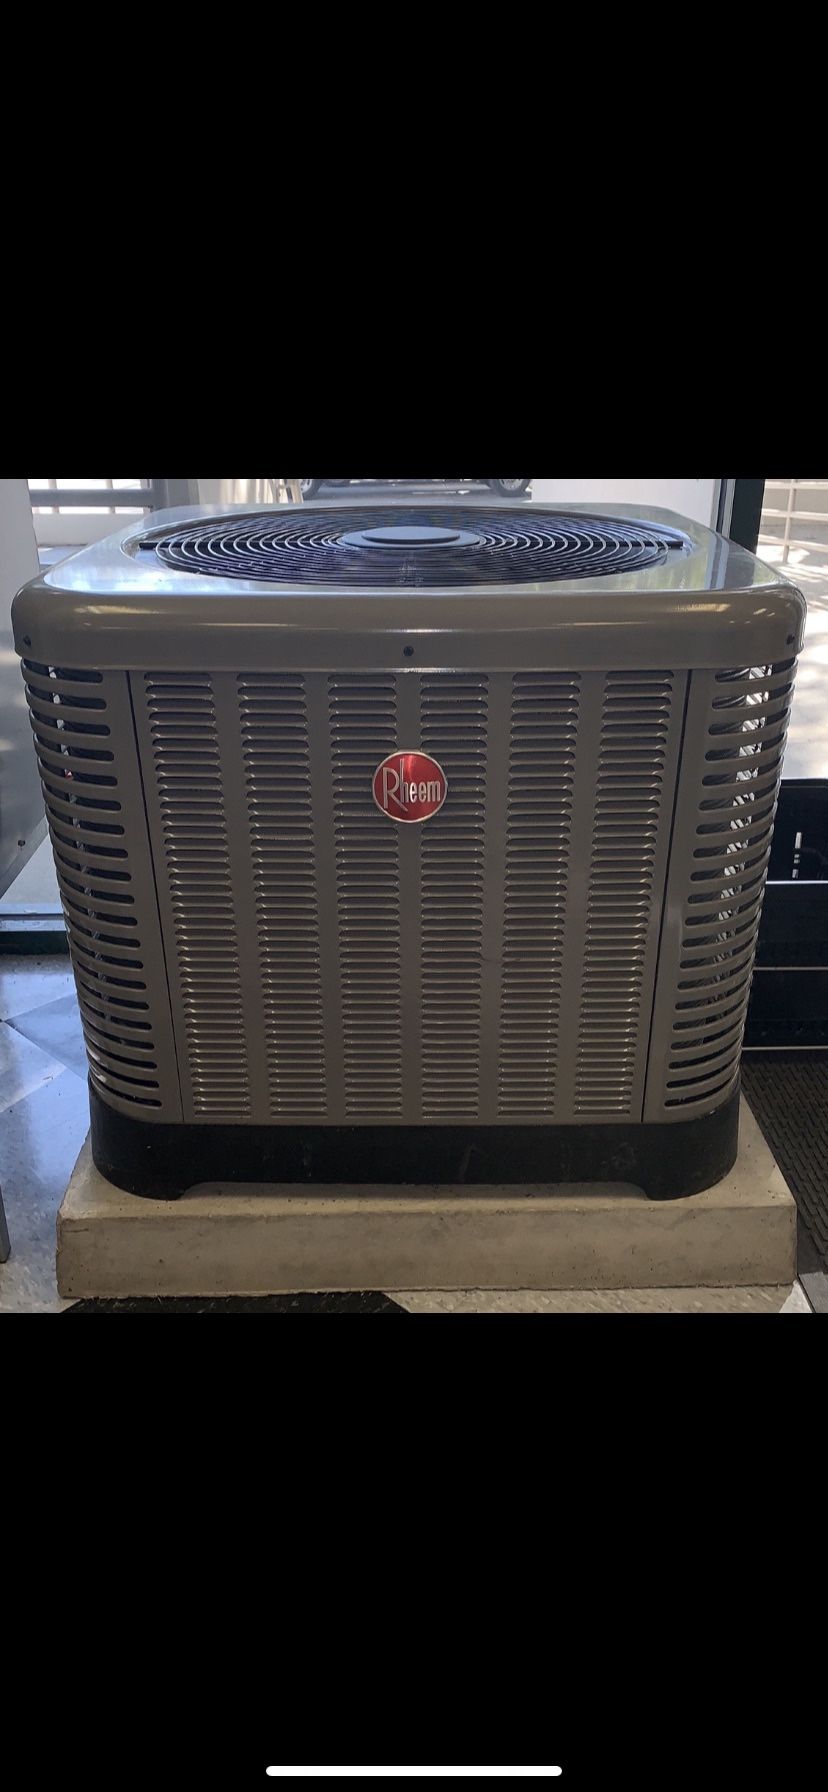 New 3 Ton Rheem Air Conditioning Systems! Wholesale Prices! Warranty! Local Delivery Included!